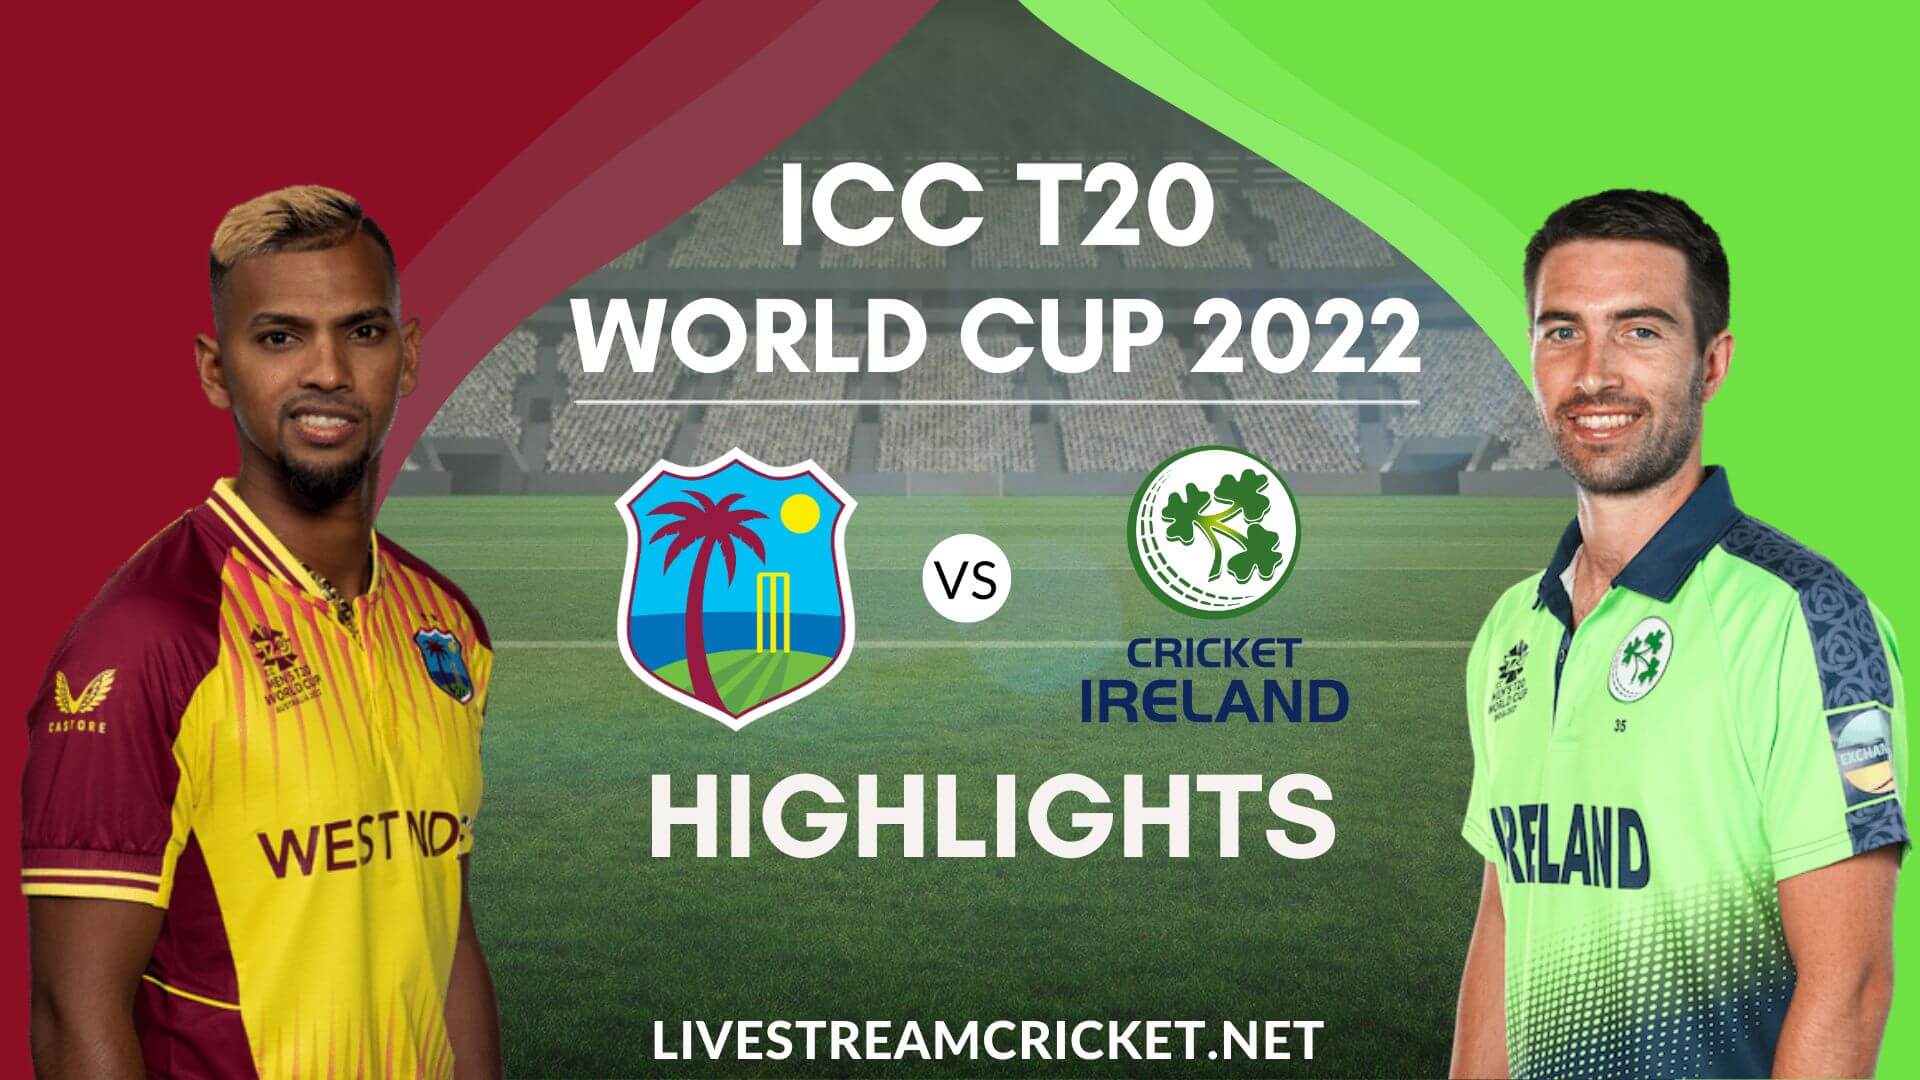 West Indies Vs Ireland T20 WC Highlights 2022